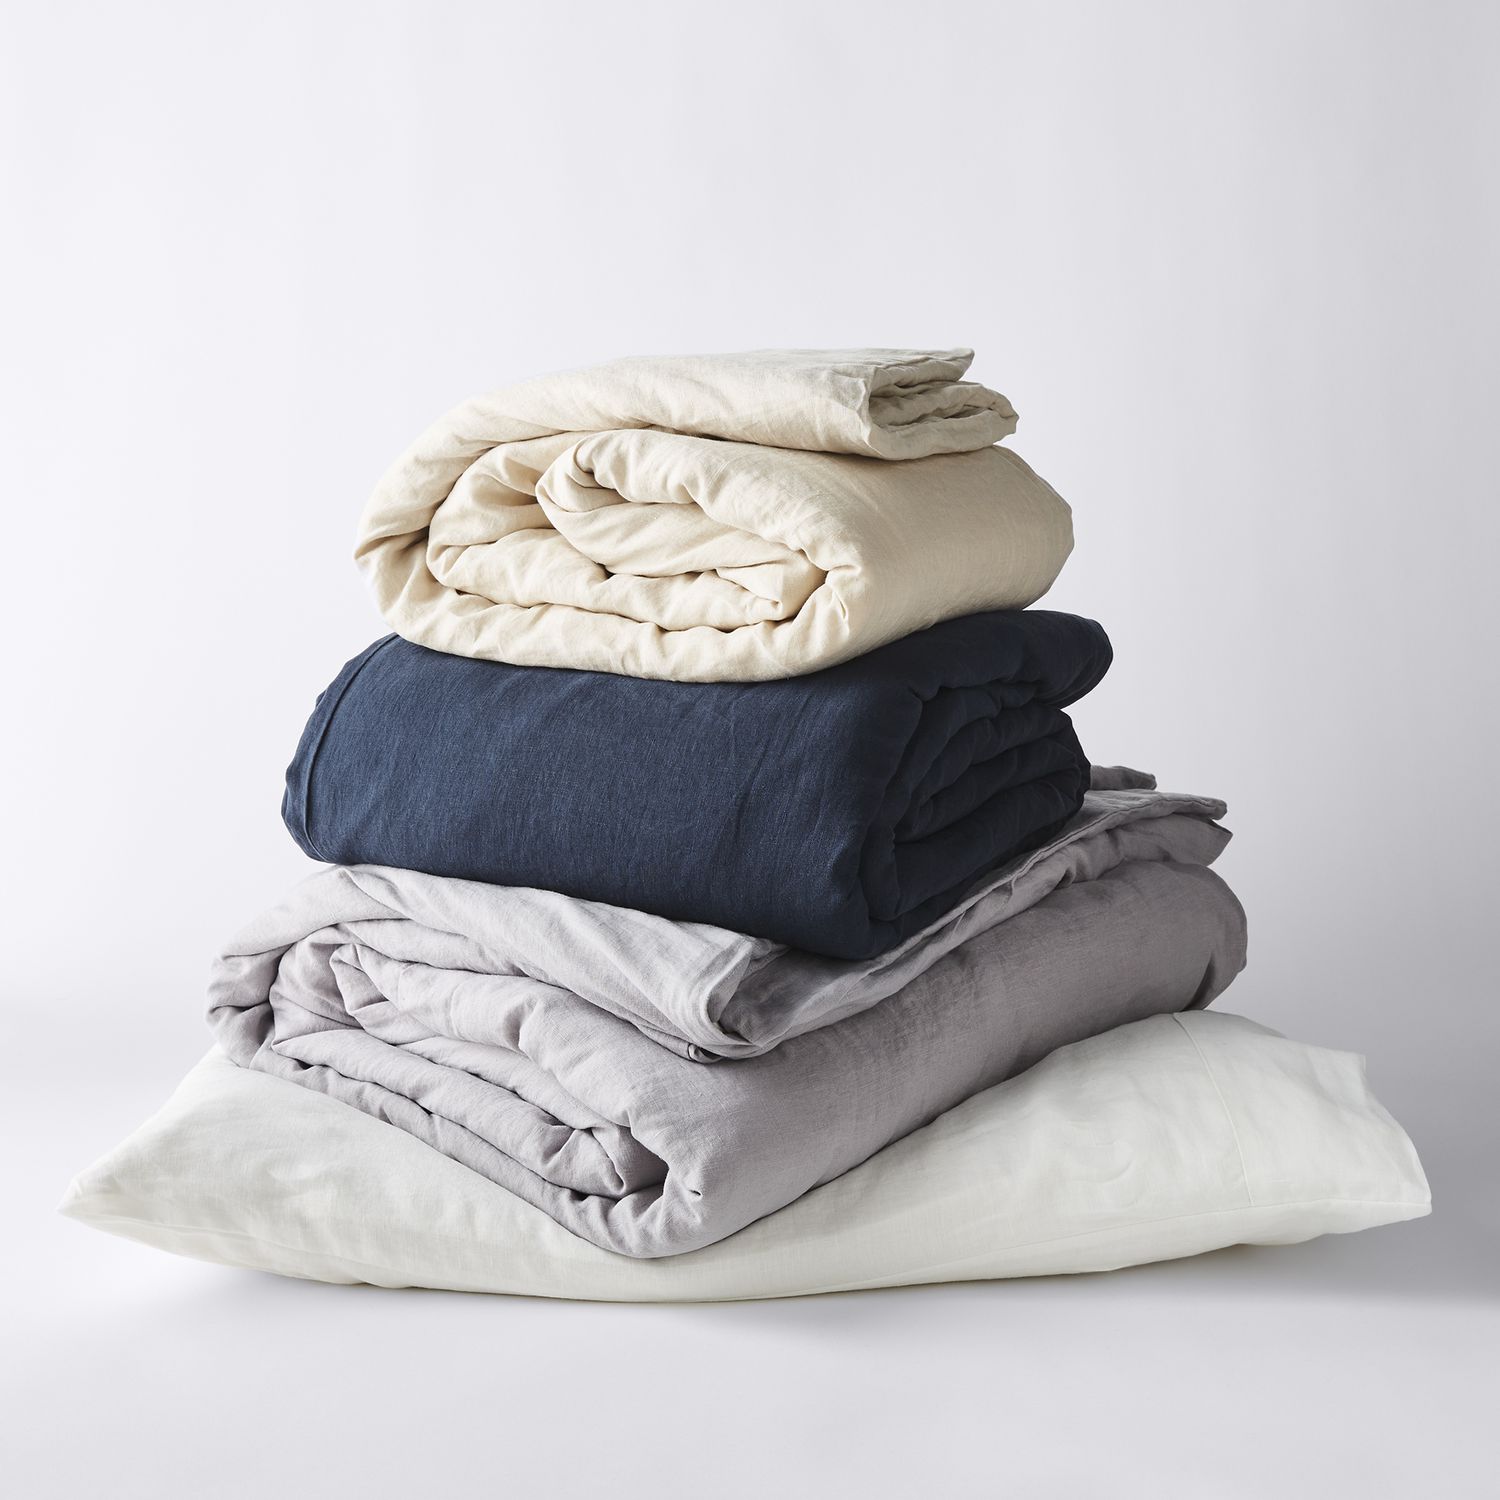 Weighted Blanket & Linen Duvet Cover on Food52